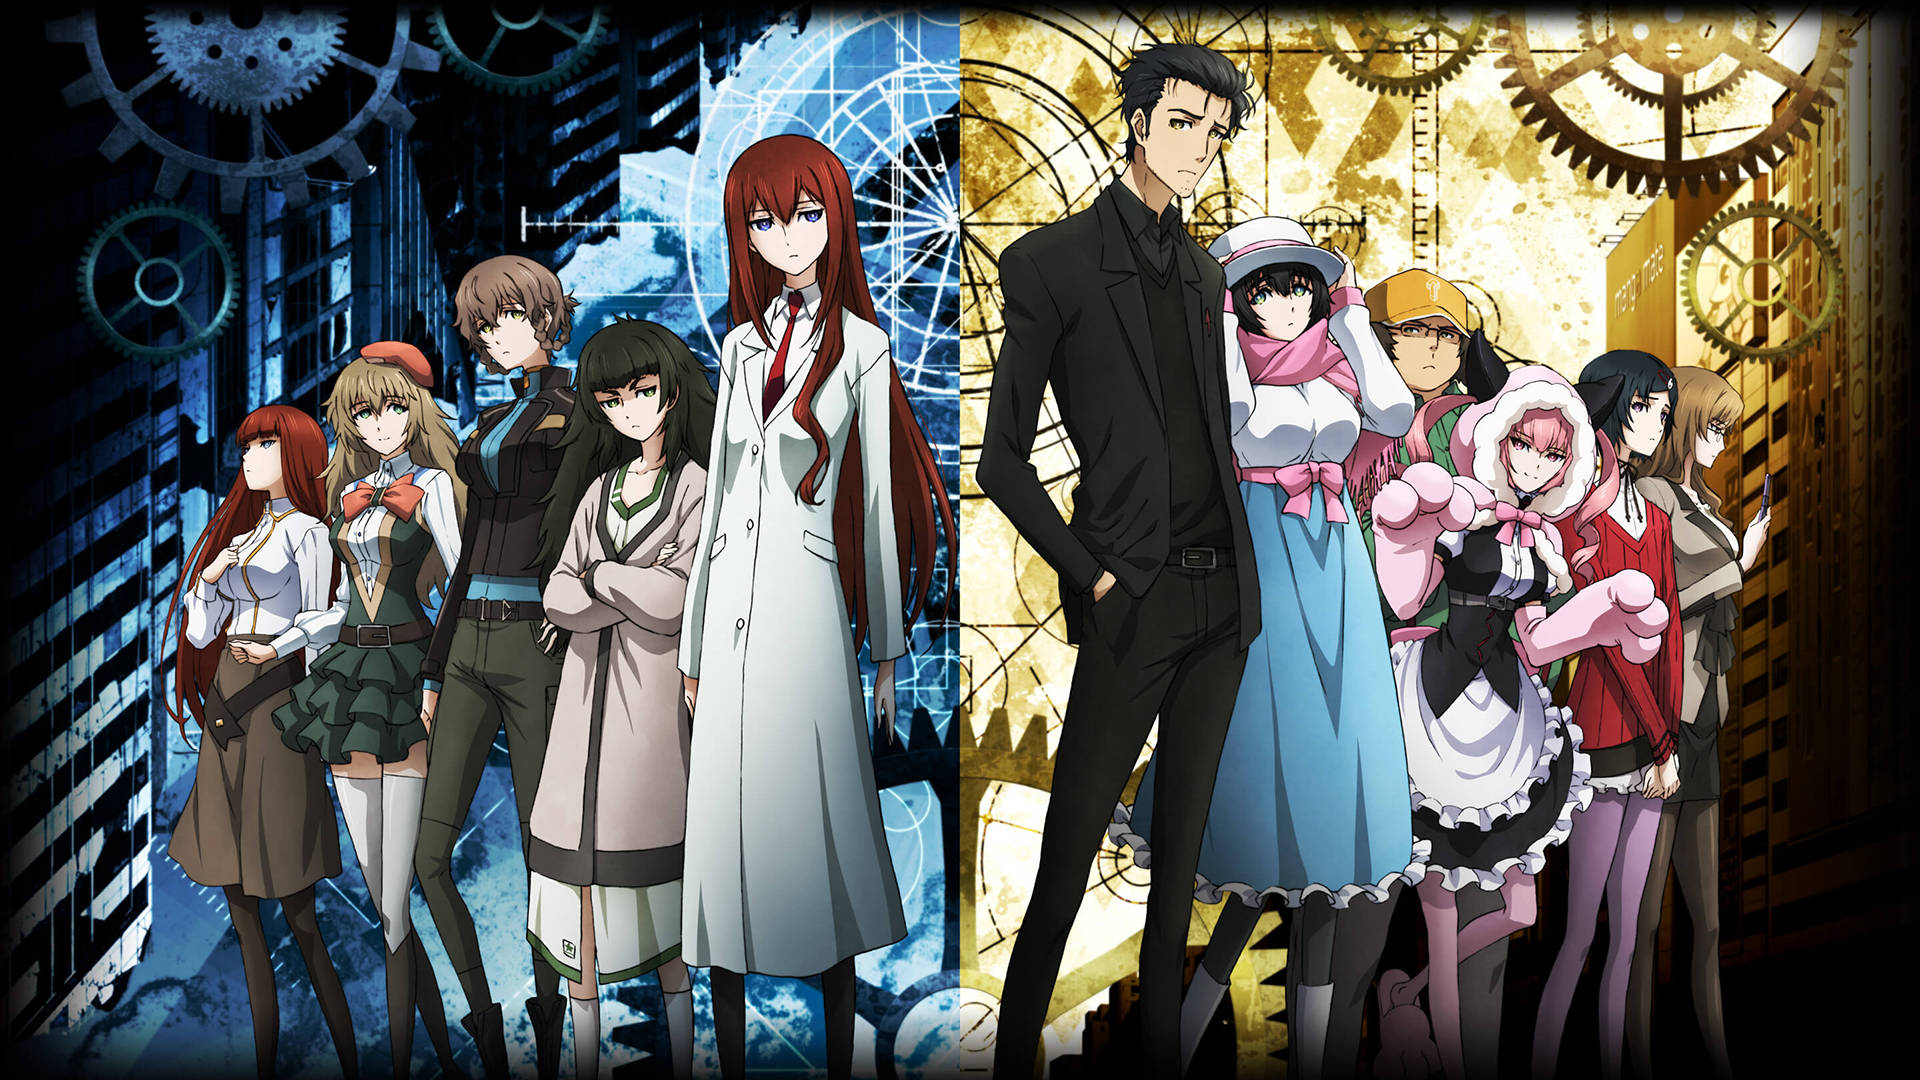 Steins Gate Stylish Outfits Wallpaper